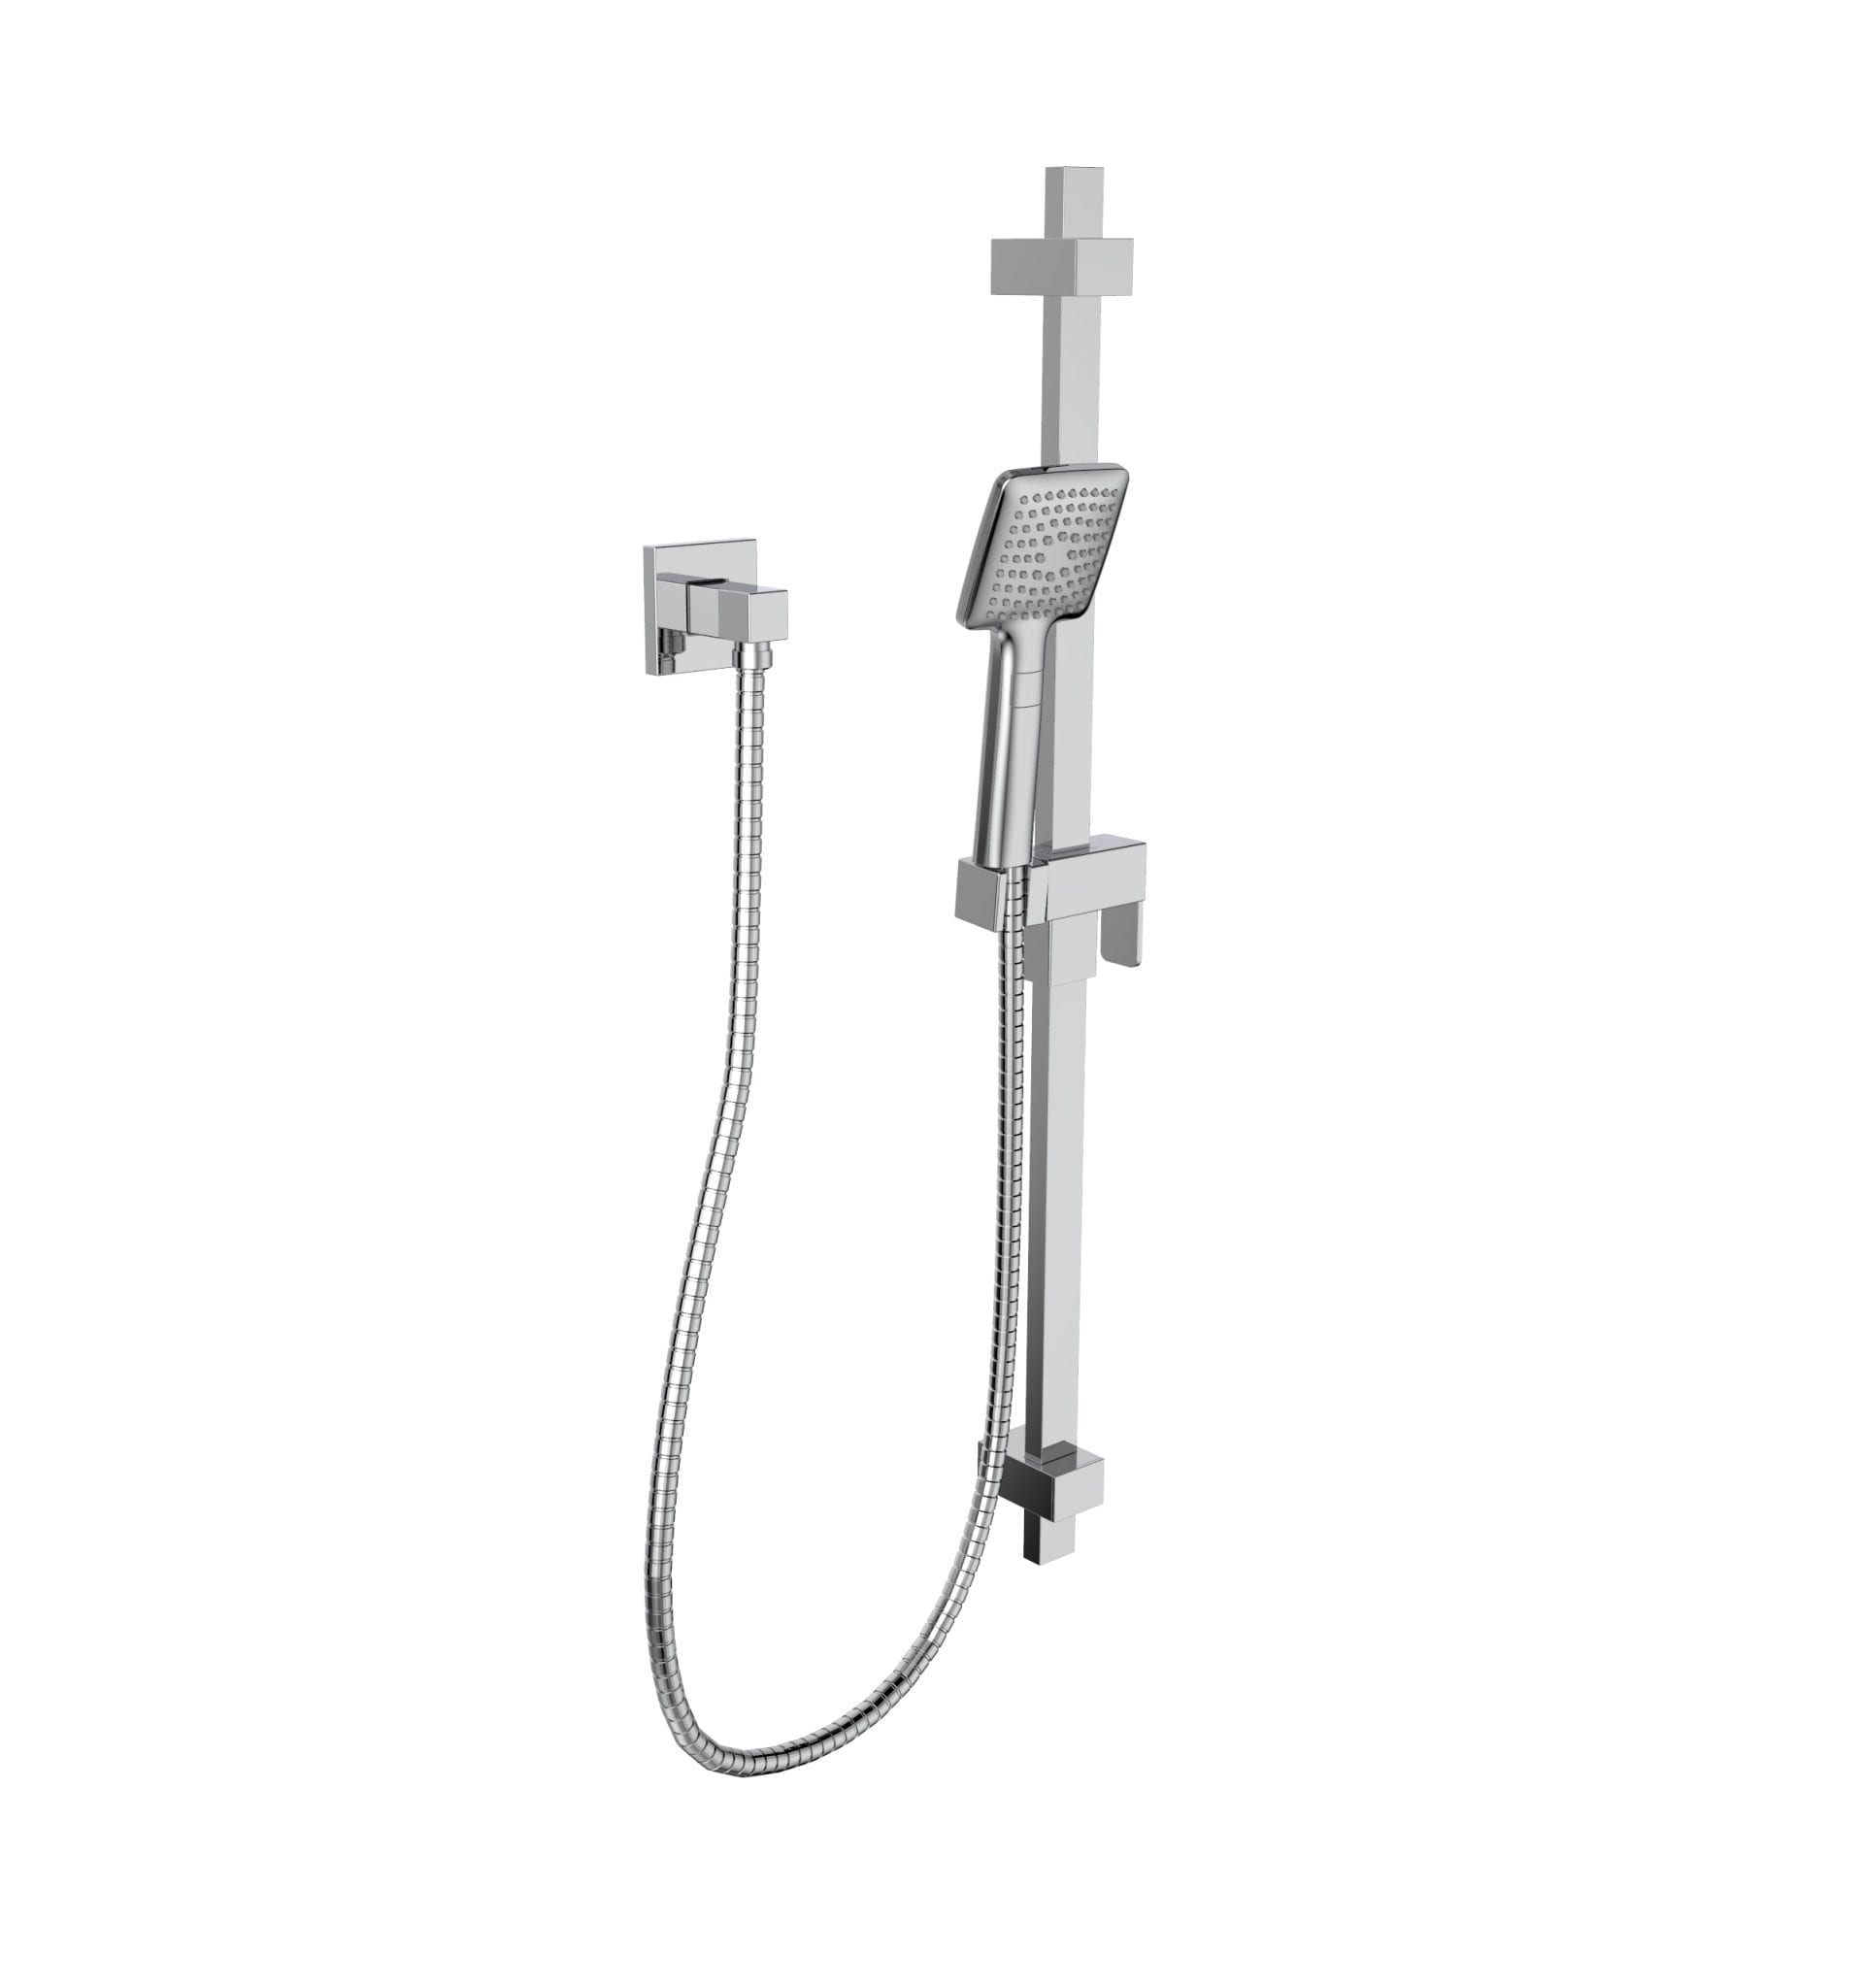 Bélanger B90-831- Sliding Bar Kit (Square) With Dual Function Hand Shower, Water Supply Elbow And Flexible Hose